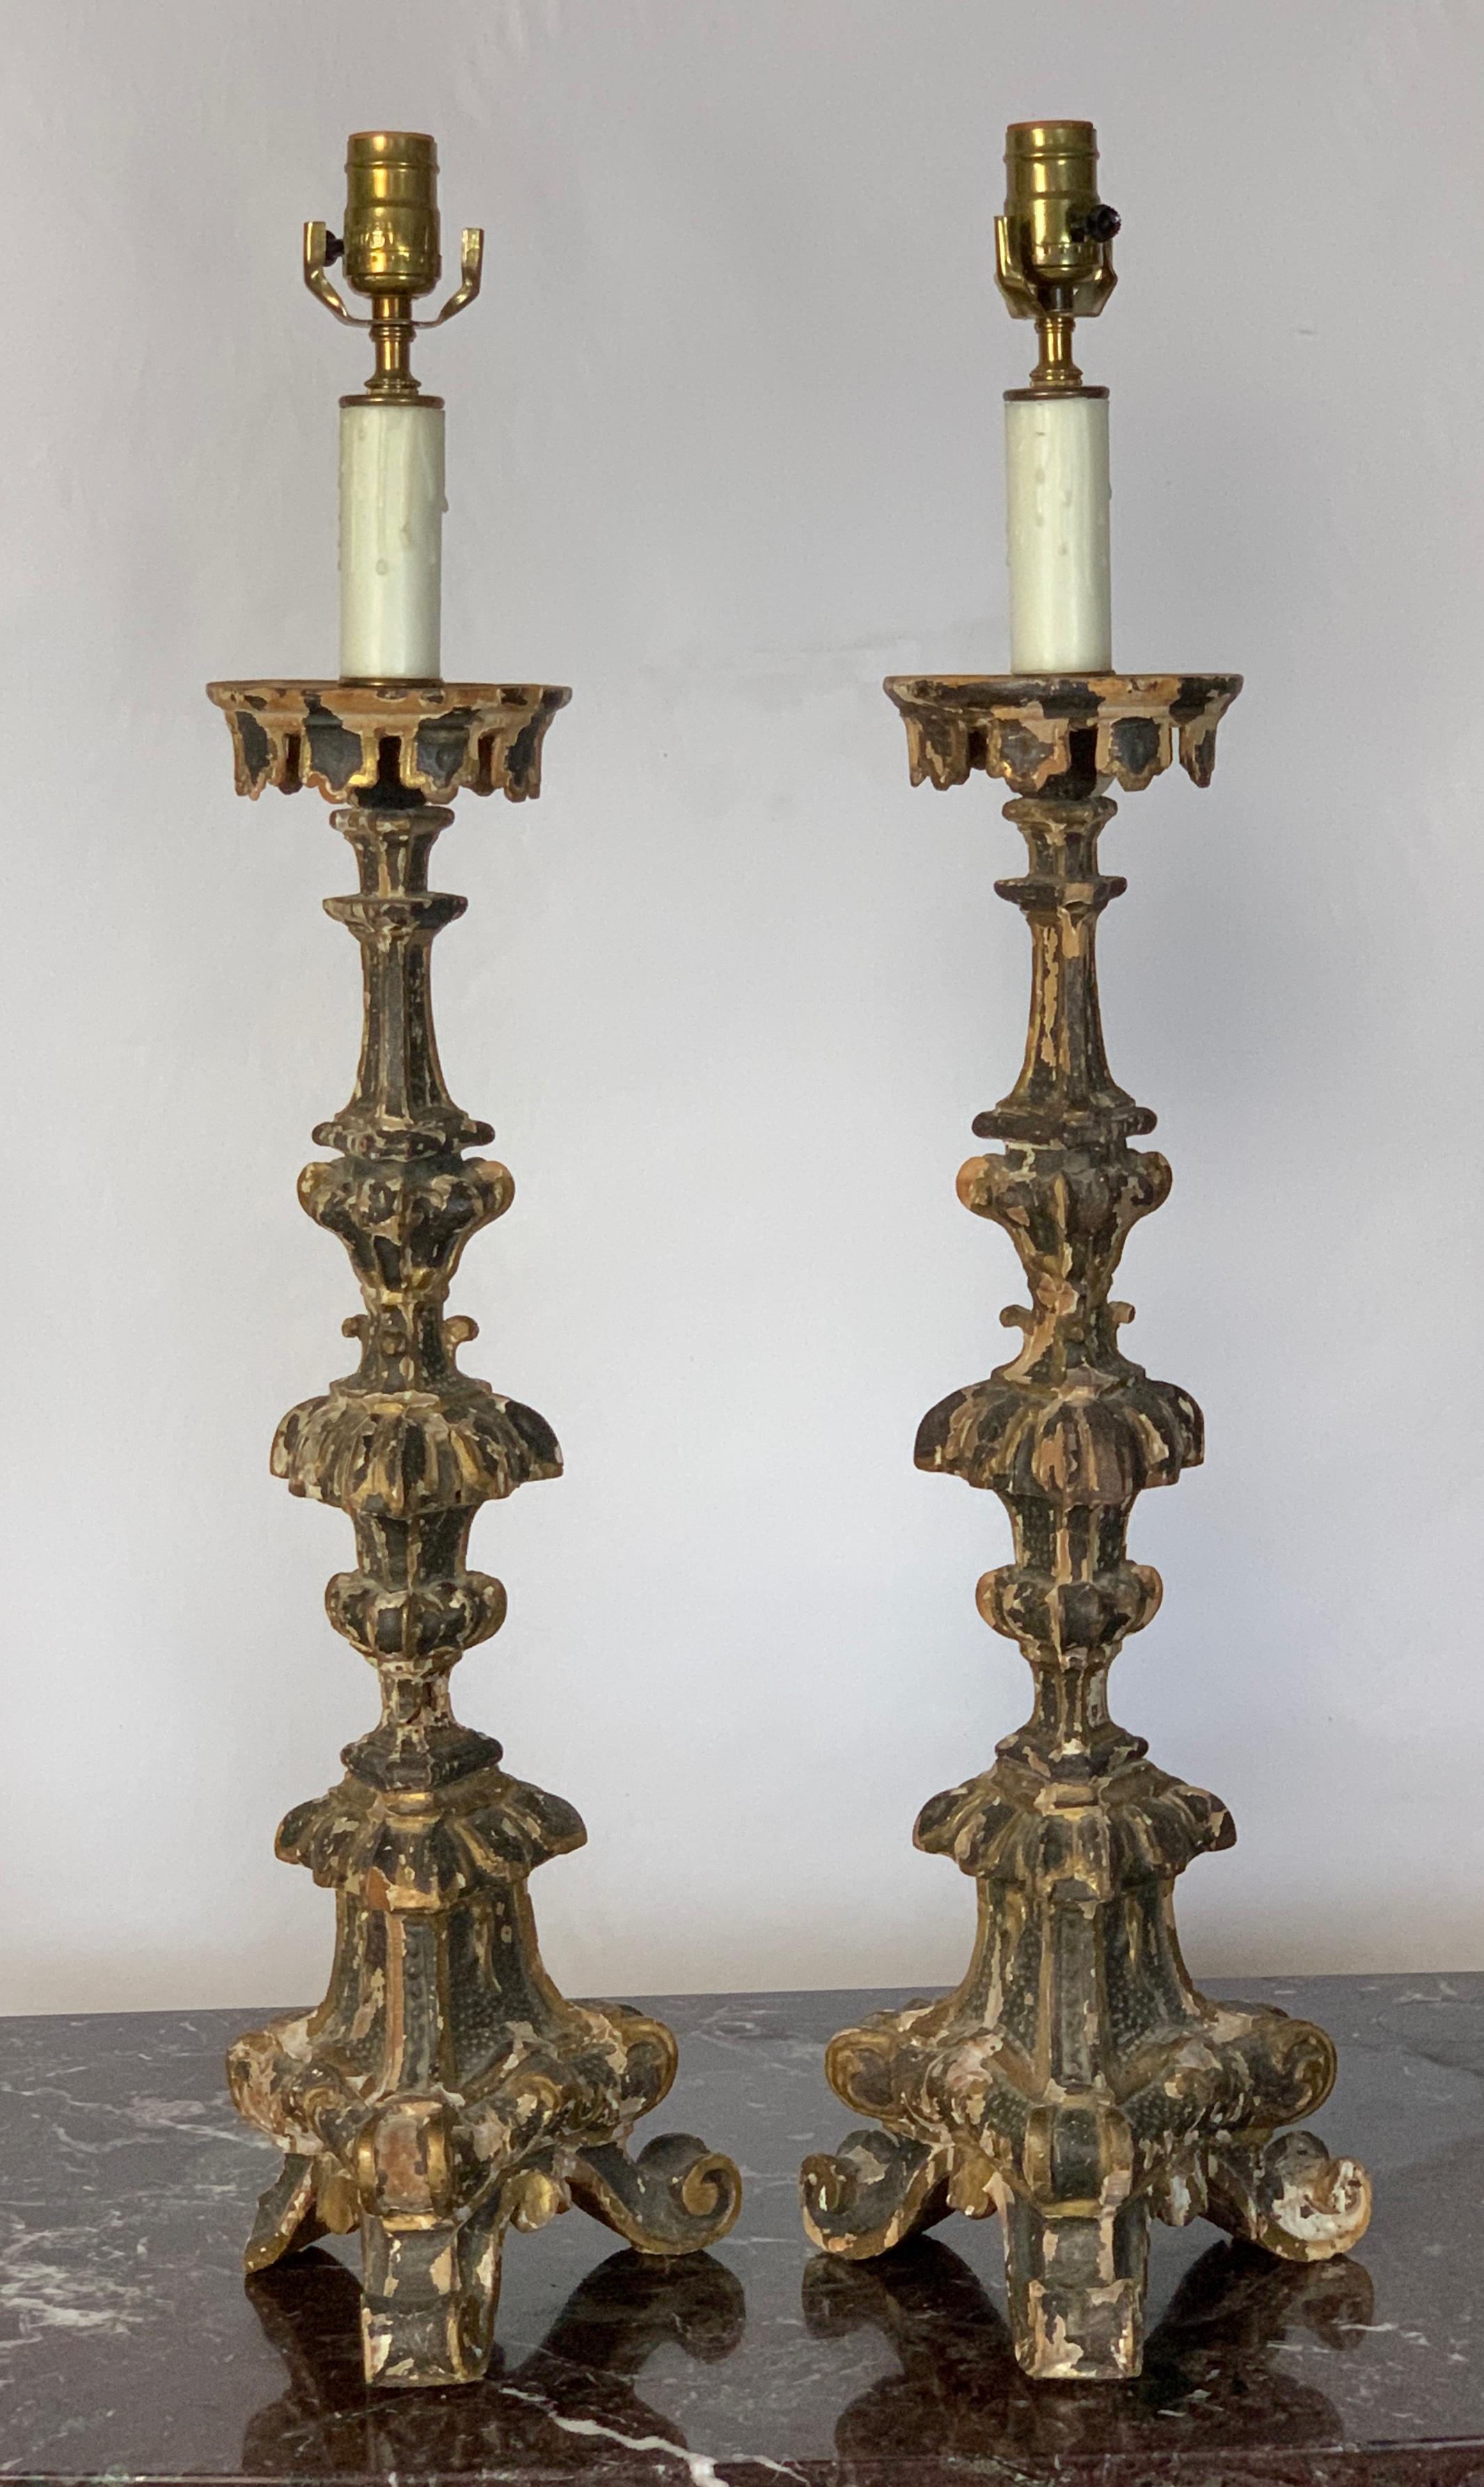 Mid-18th Century Pair of 18th Century Italian Pricket Candlestick Lamps